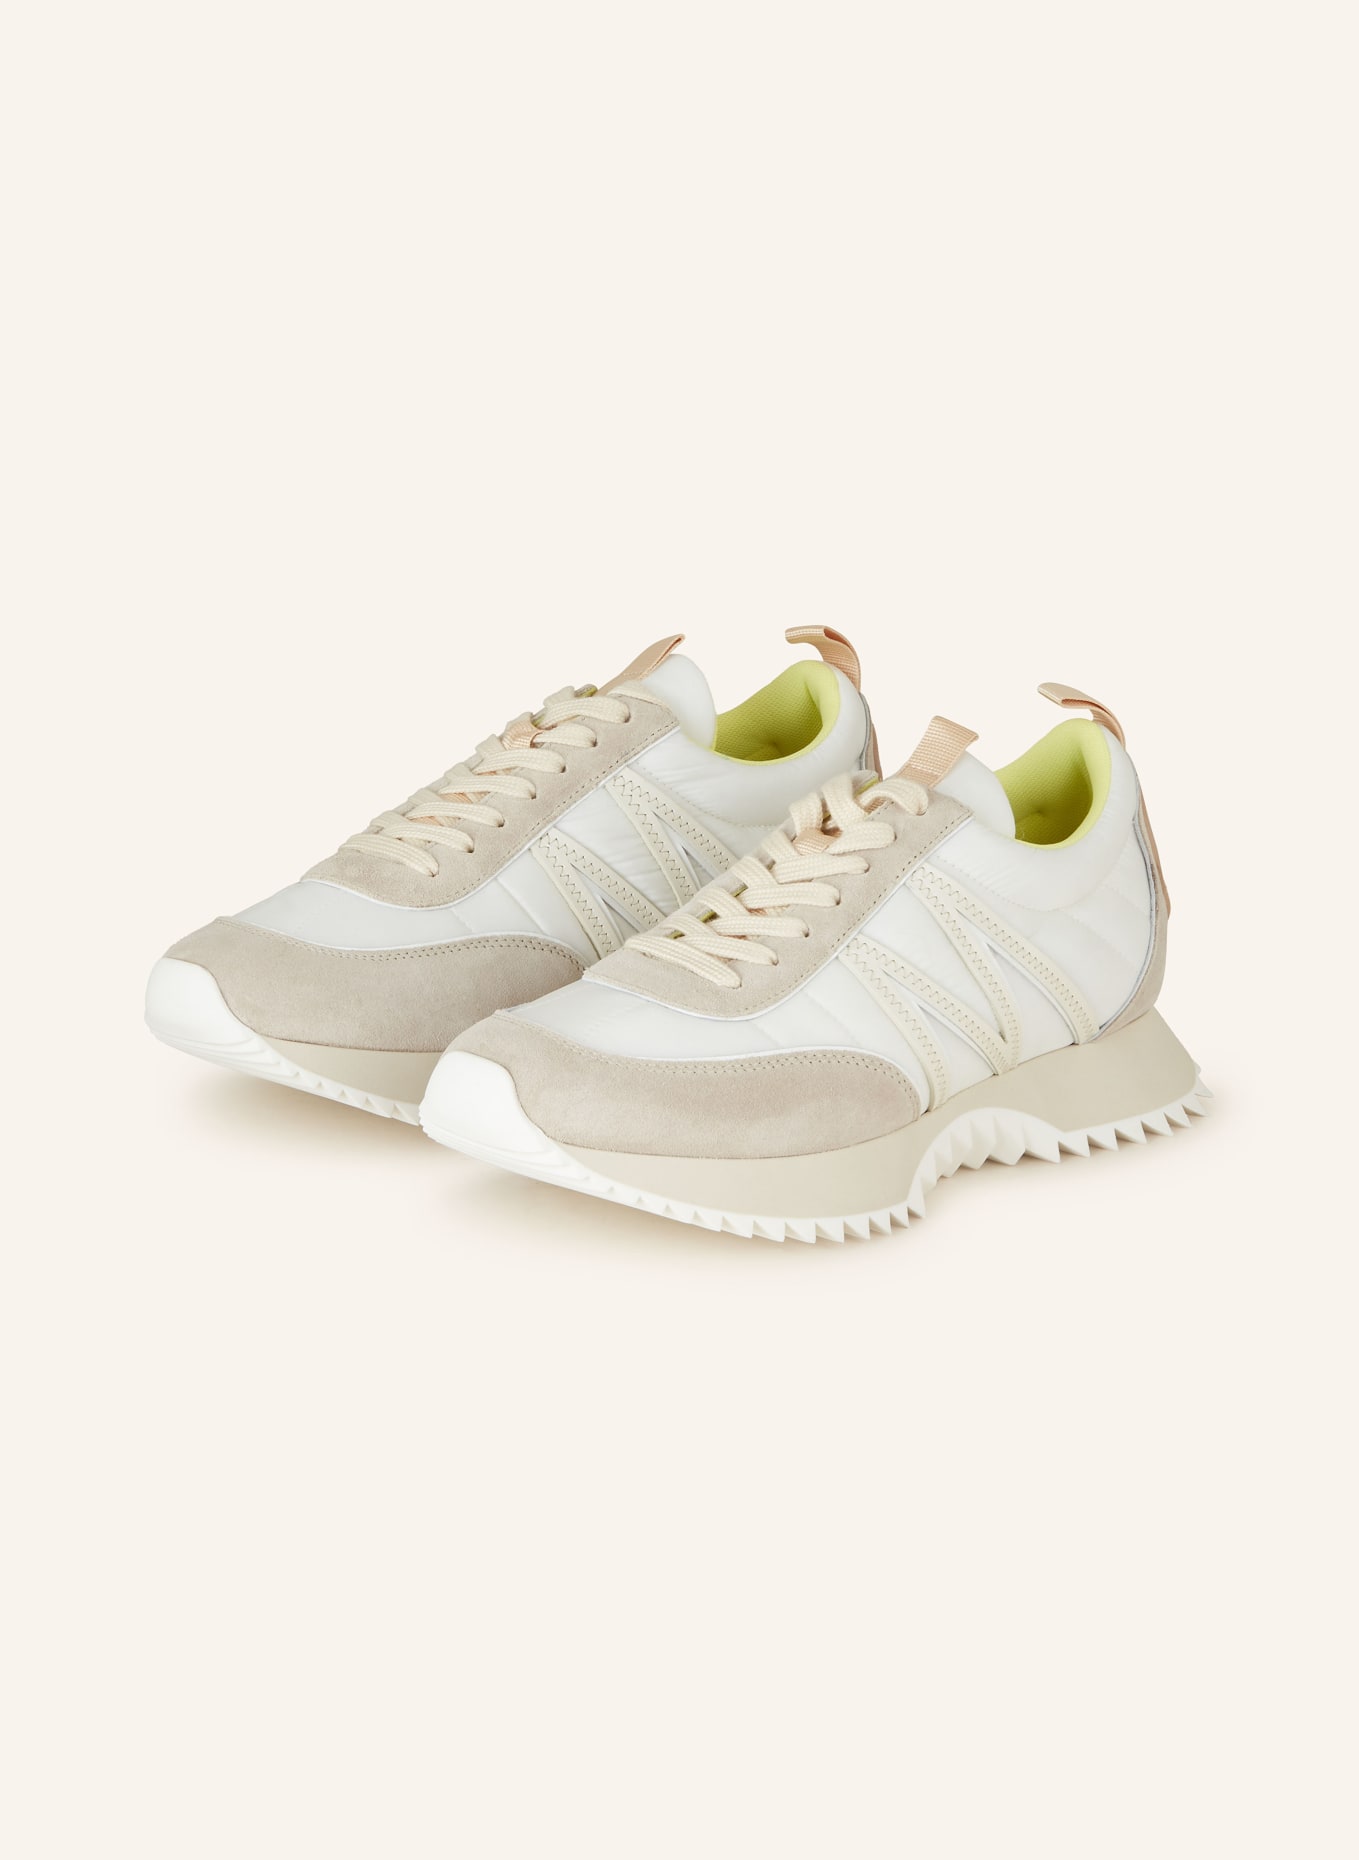 MONCLER Sneaker PACEY, Farbe: WEISS/ TAUPE/ ECRU (Bild 1)